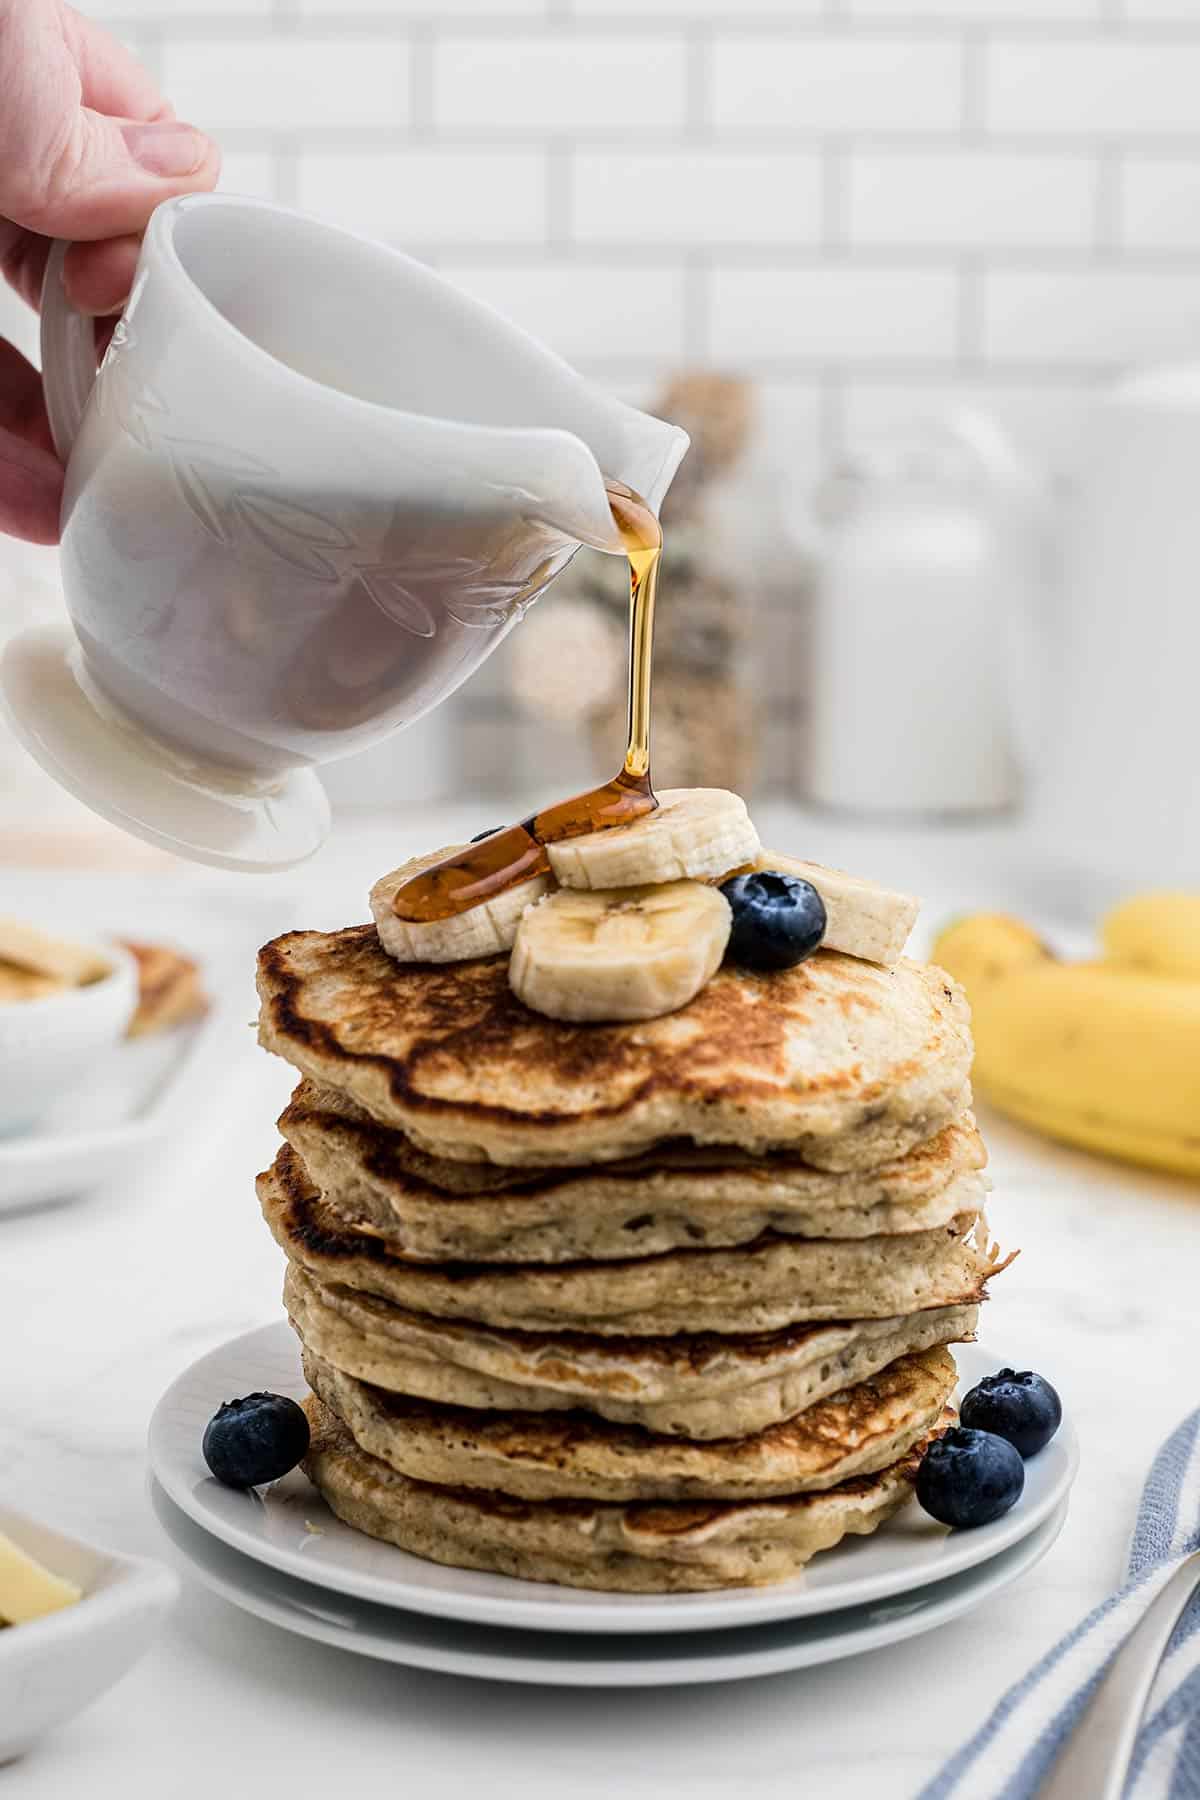 syrup being poured over a stack of pancakes.